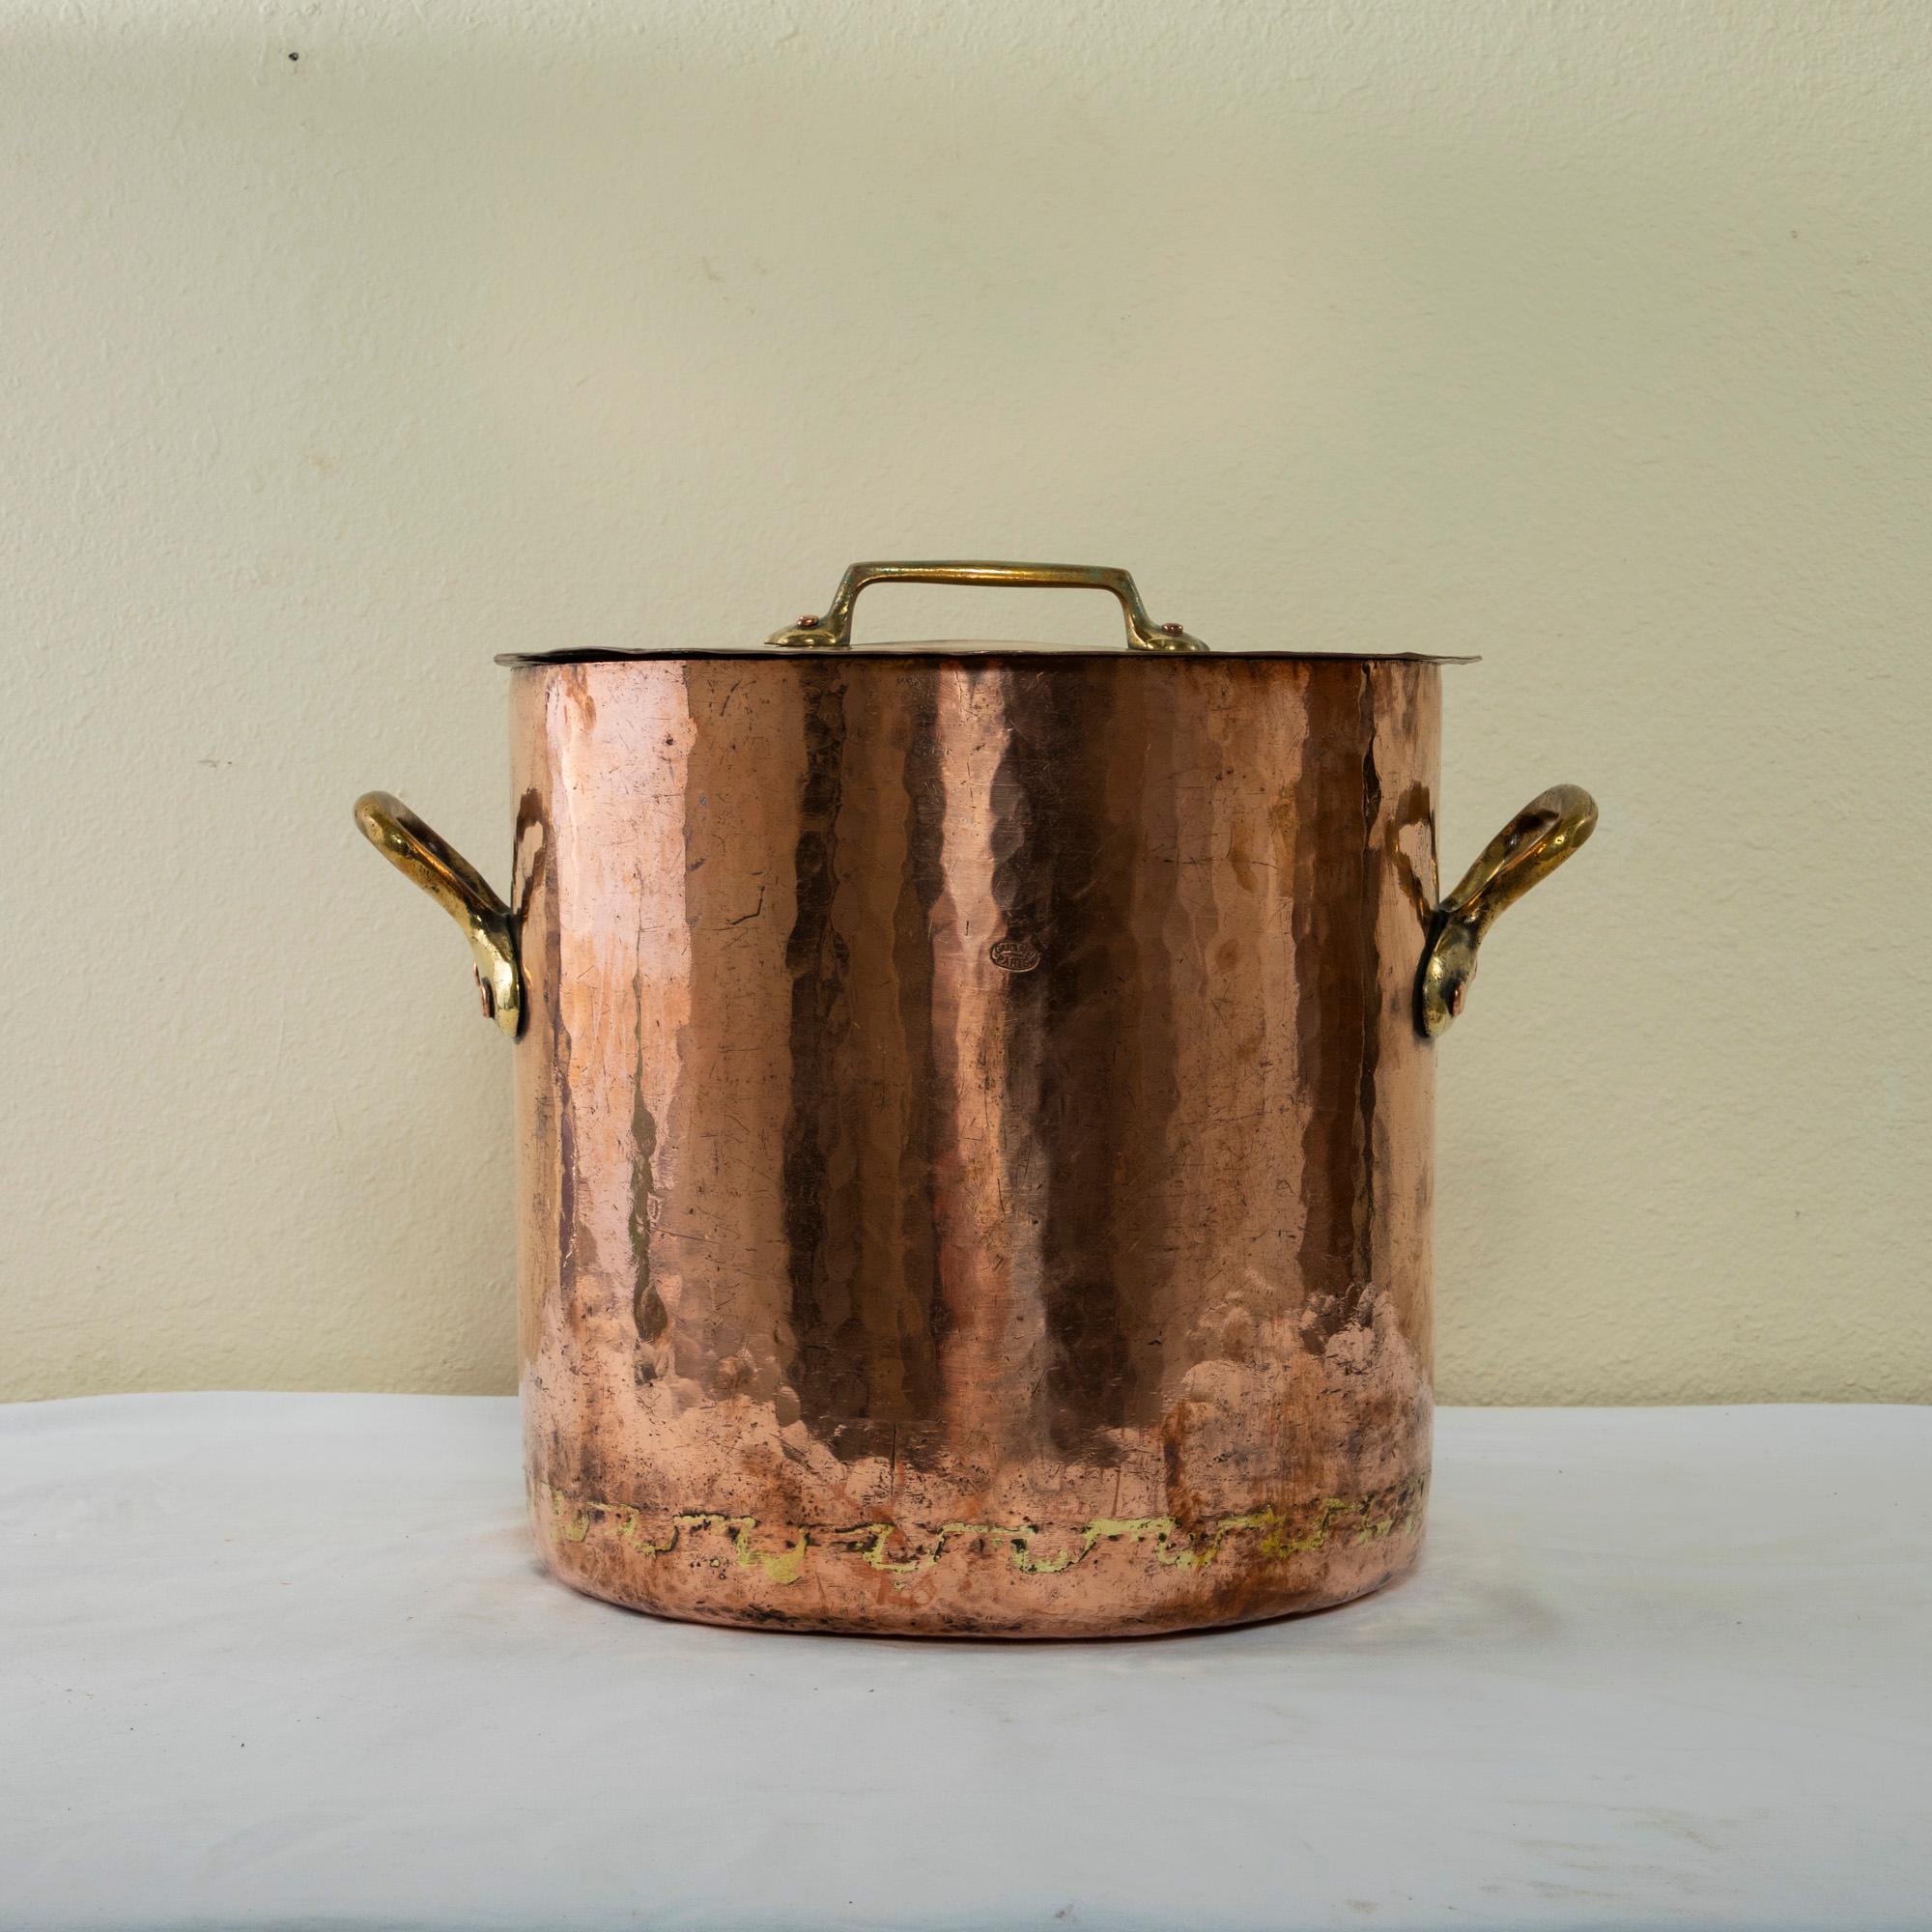 Originally used to make jams, this large French mid-twentieth century copper stock pot is hand hammered and features its original lid with copper riveted brass handle. Brass handles are additionally fitted to the sides of the pot to allow for easier